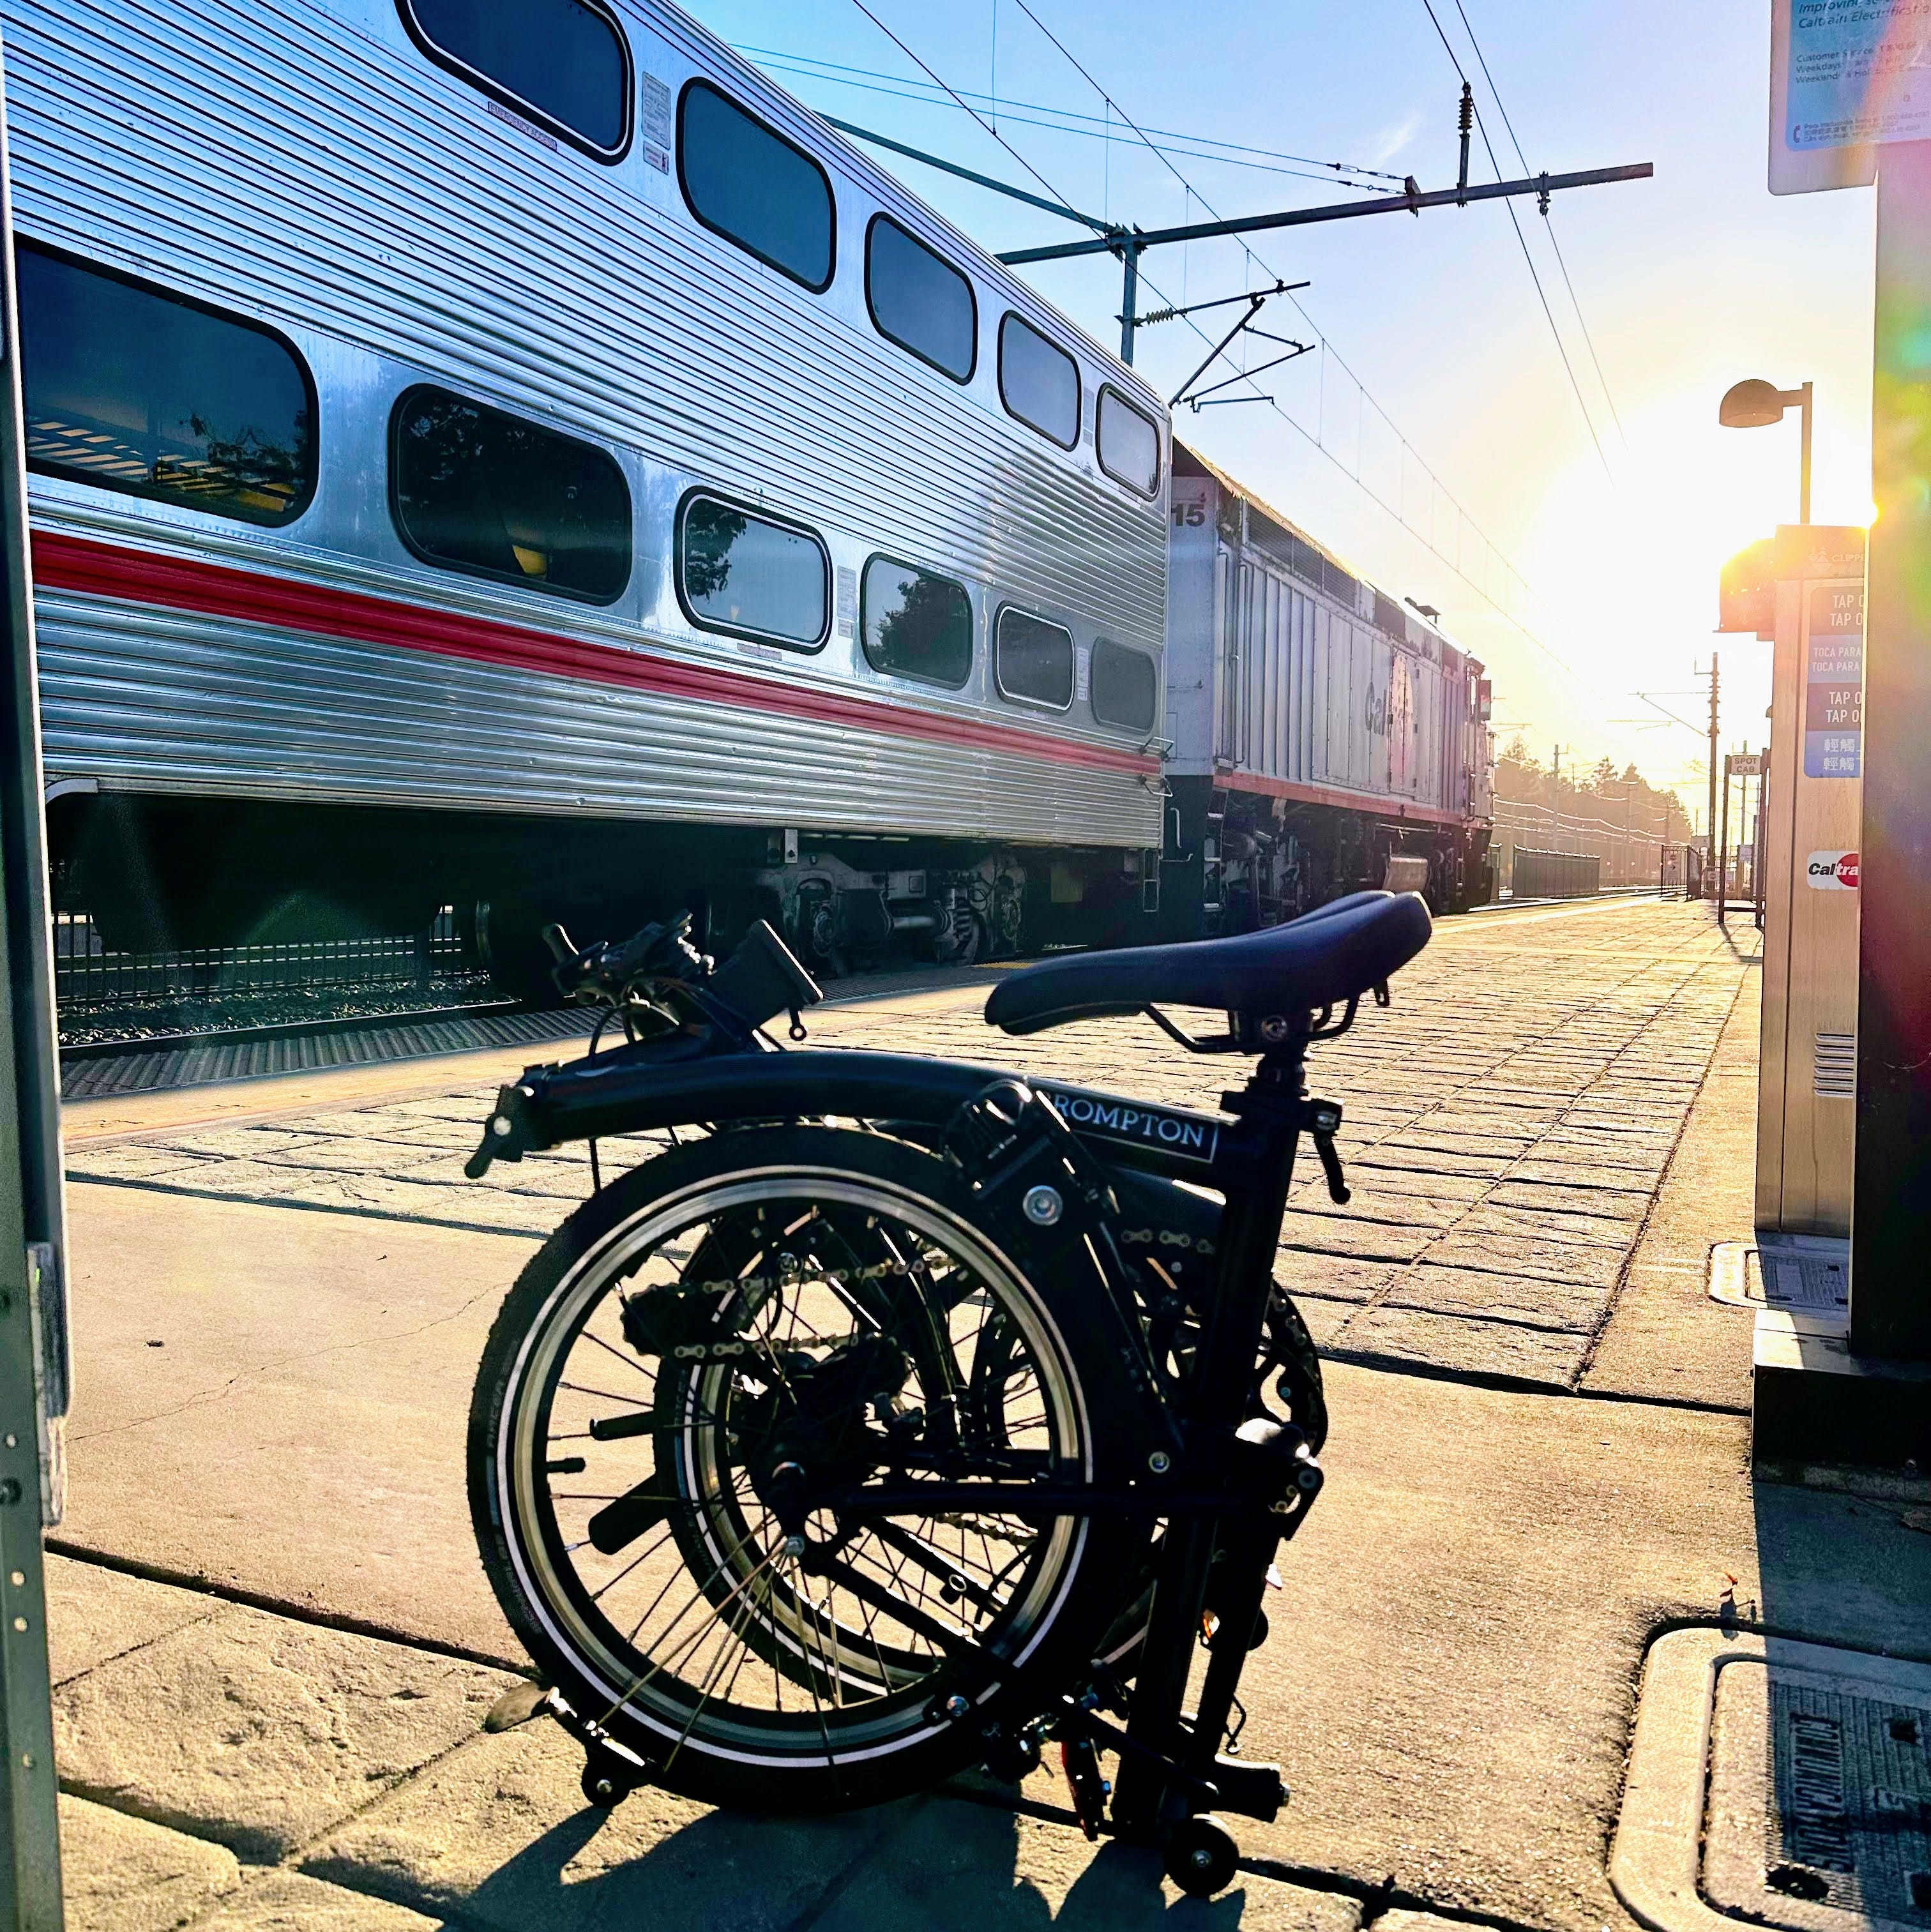 A Black Brompton C-Line bicycle fully folded. Caltrain in the background. Sun in the distance.